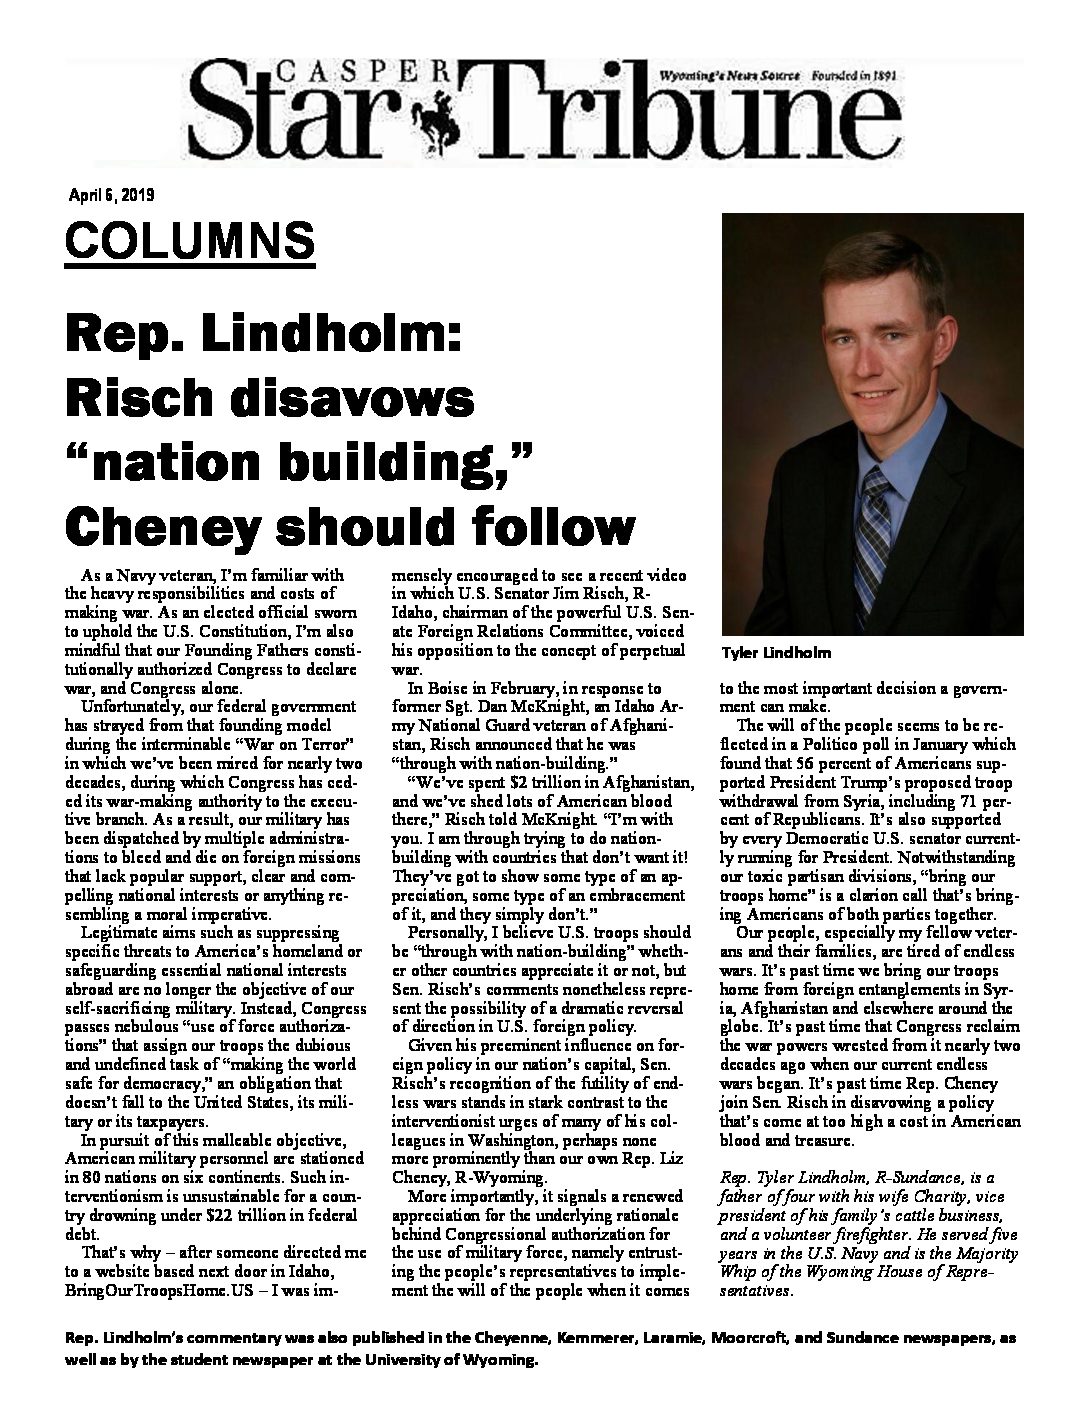 Star Tribune – Rep. Lindholm – Risch disavows _nation building,_ Cheney should follow